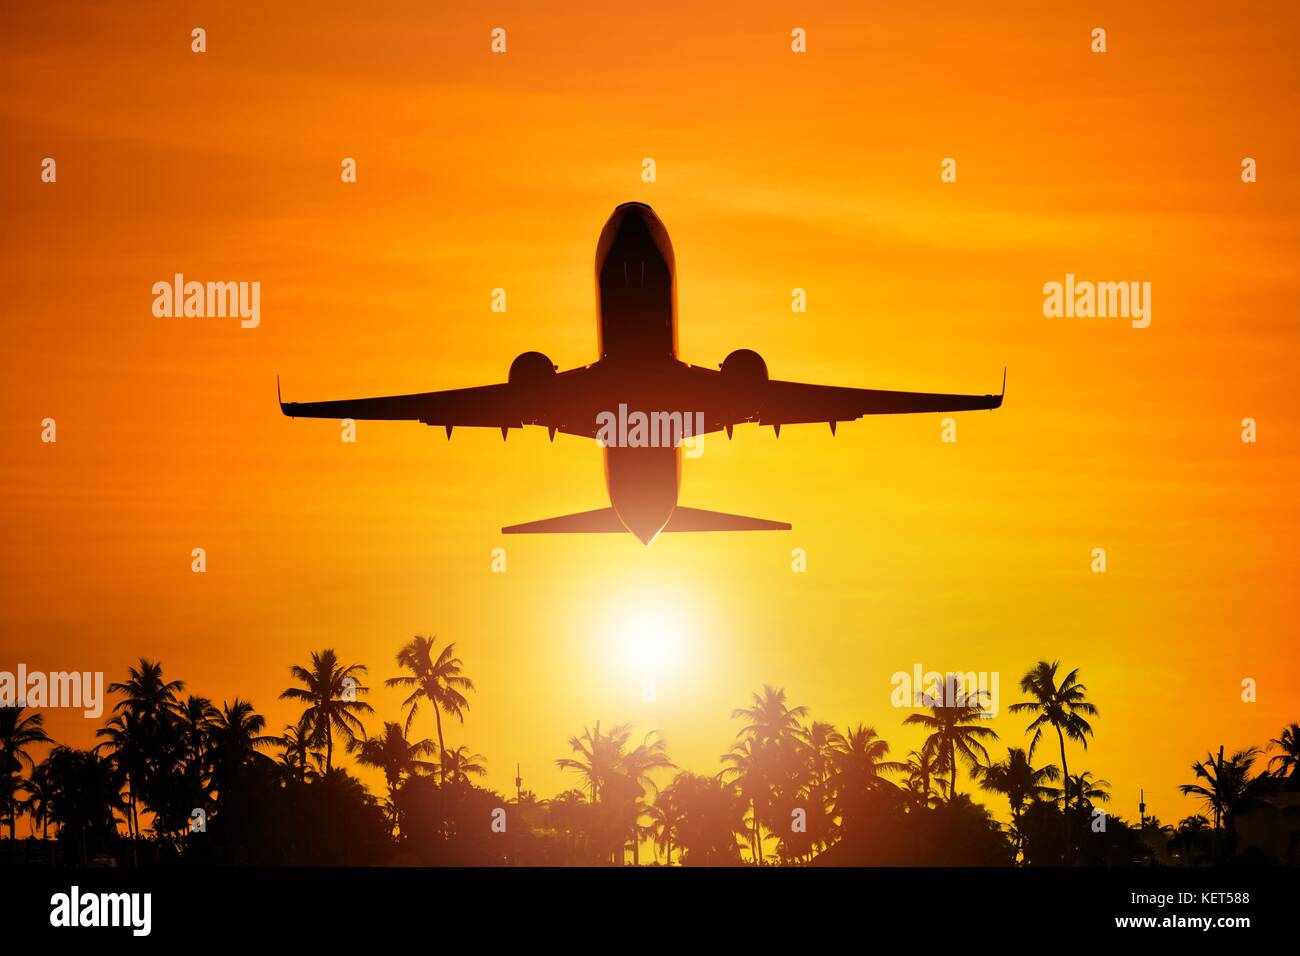 Airplane Flight To Paradise Concept Image with Airliner and Palm Trees Silhouette. Travel Theme. Stock Photo